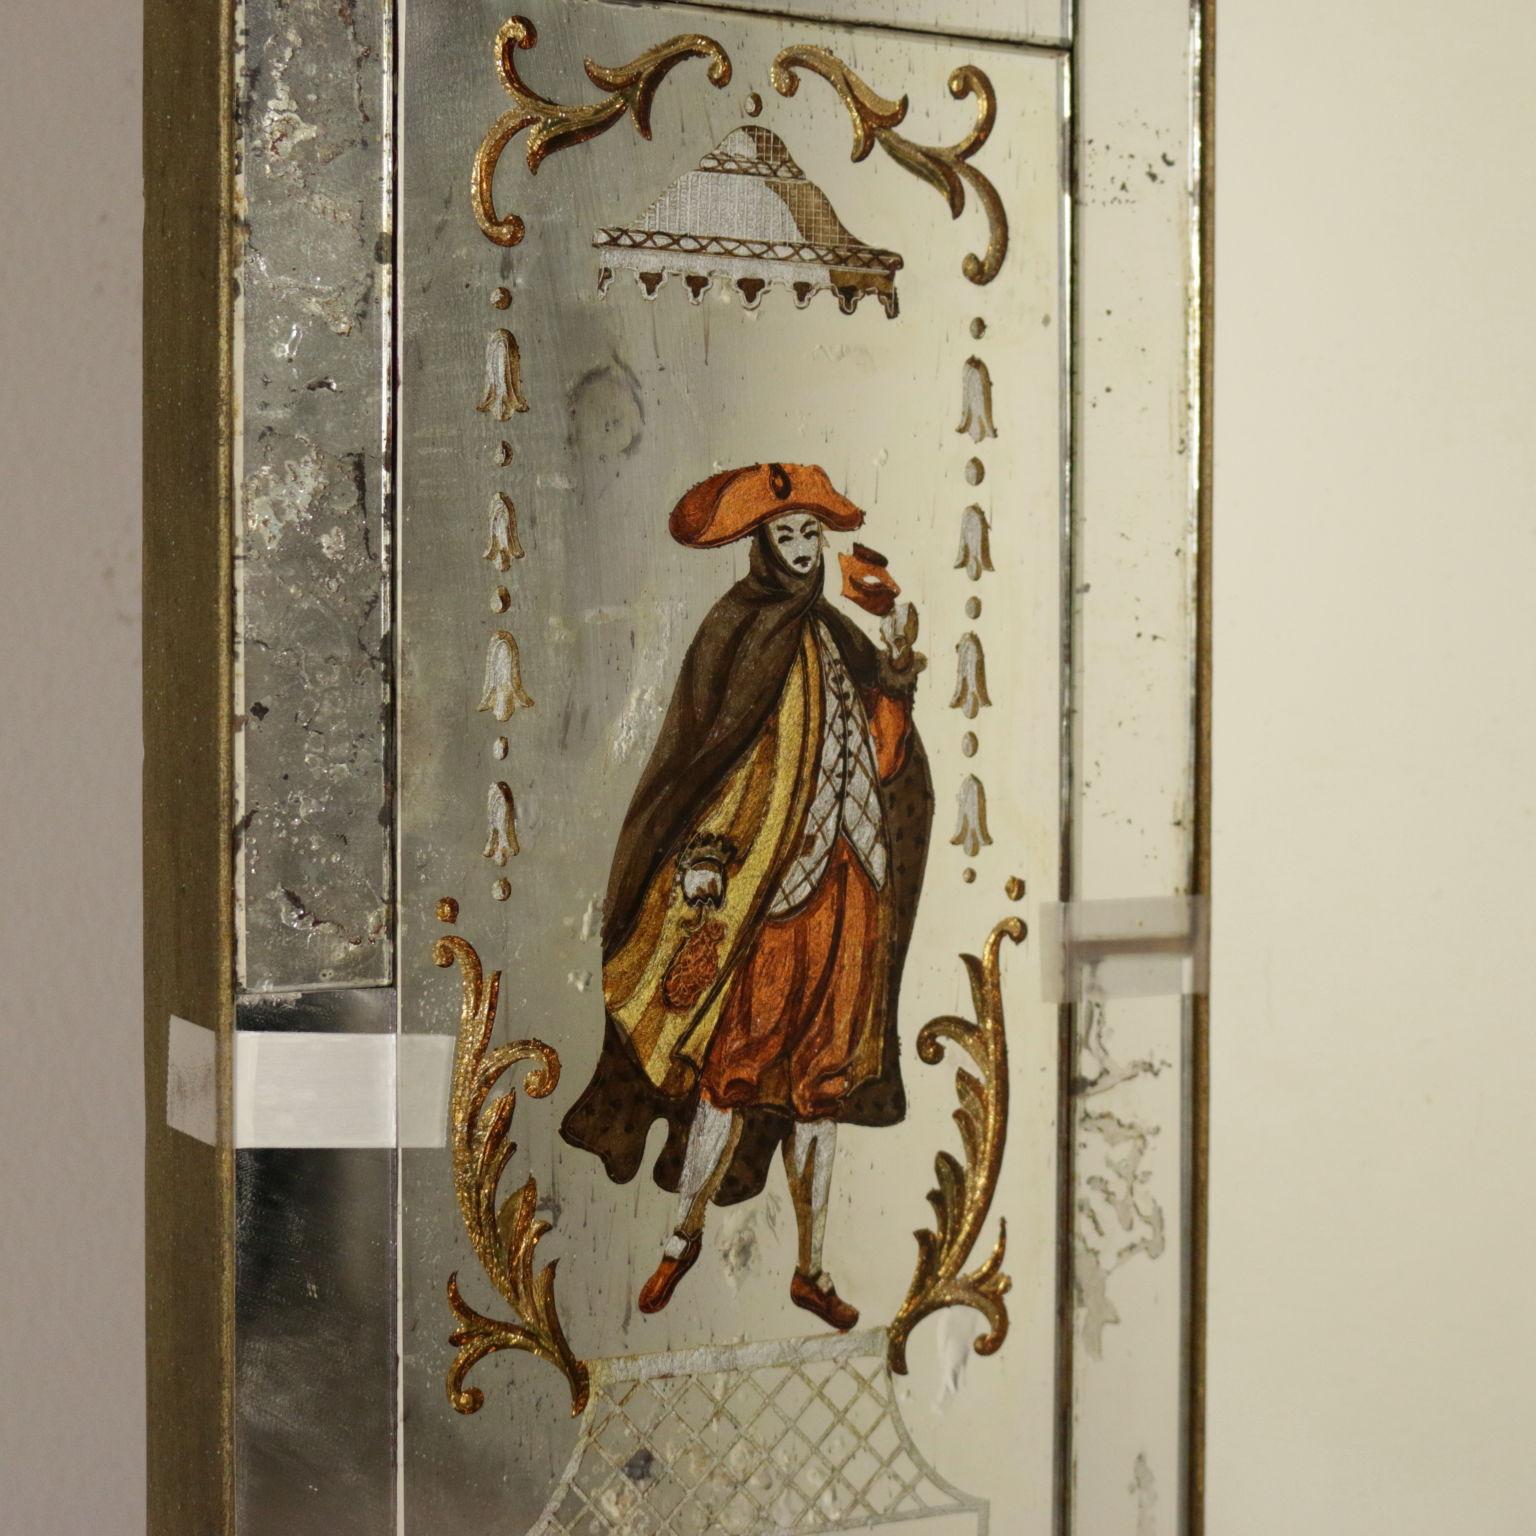 Mid-20th Century Venetian Mirror with Decorations Vintage, Italy, 1930s-1940s